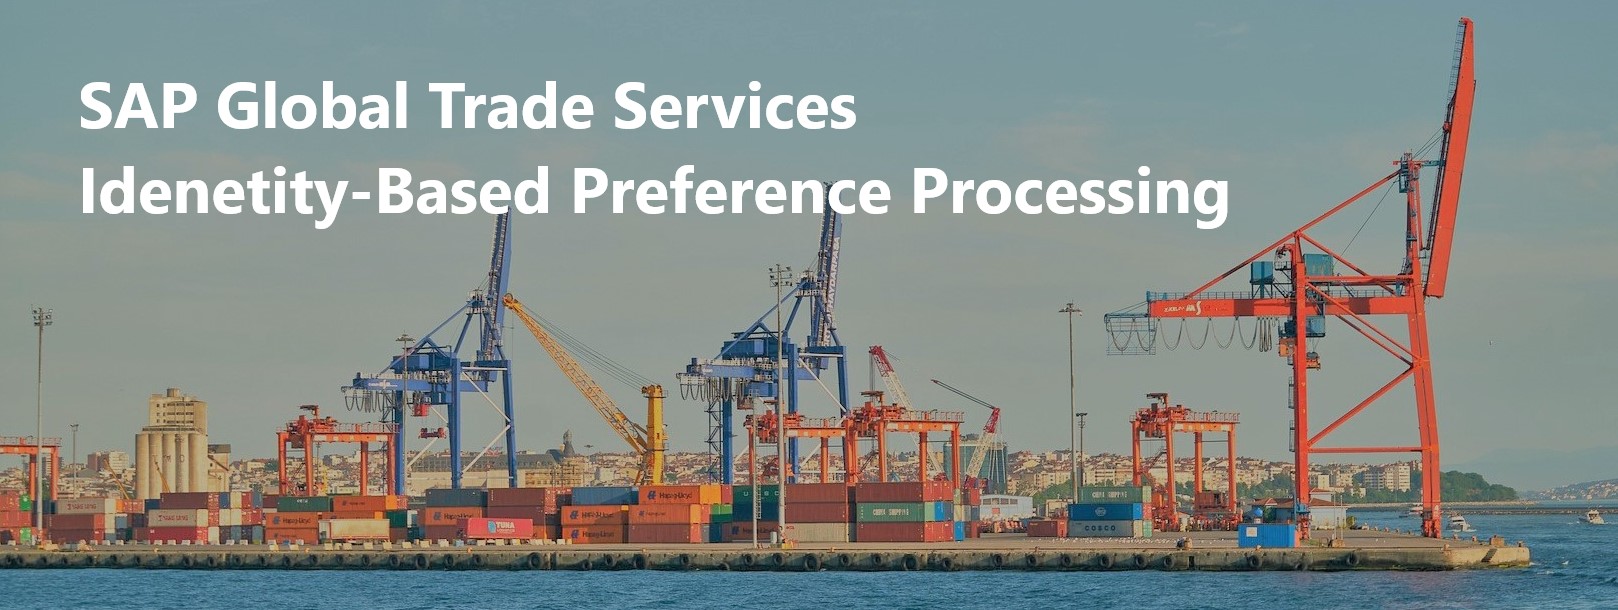 Trade preference with SAP GTS Identity-based Preference Processing (IBPP)